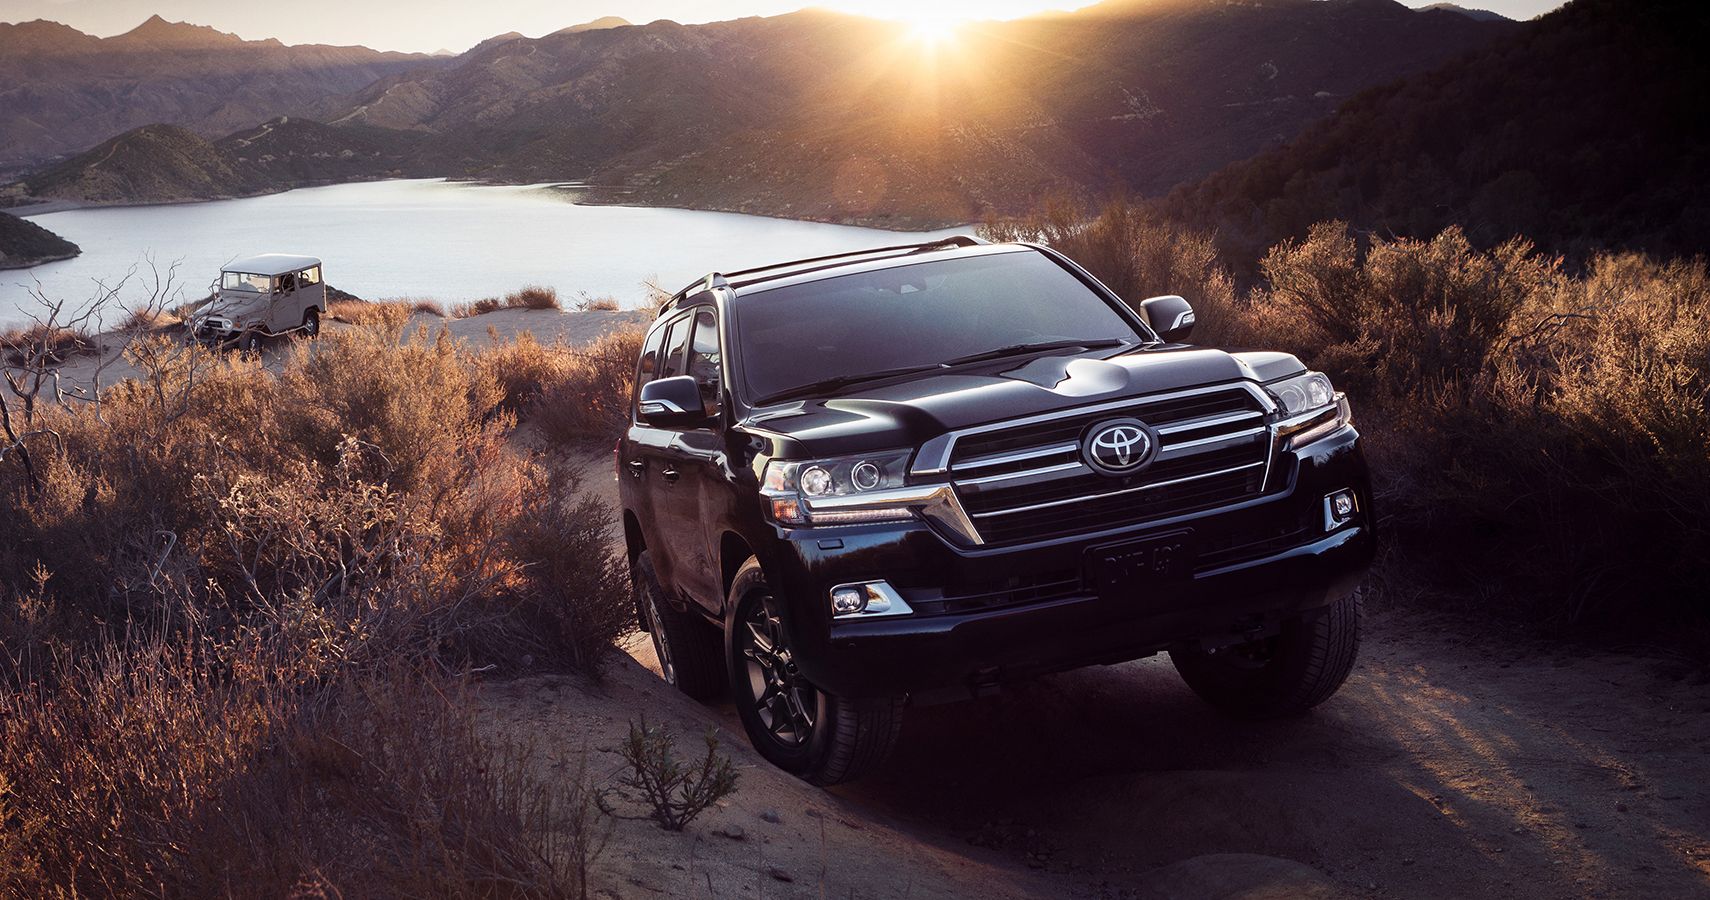 2021 Toyota Land Cruiser Heritage Edition Returns With New Options